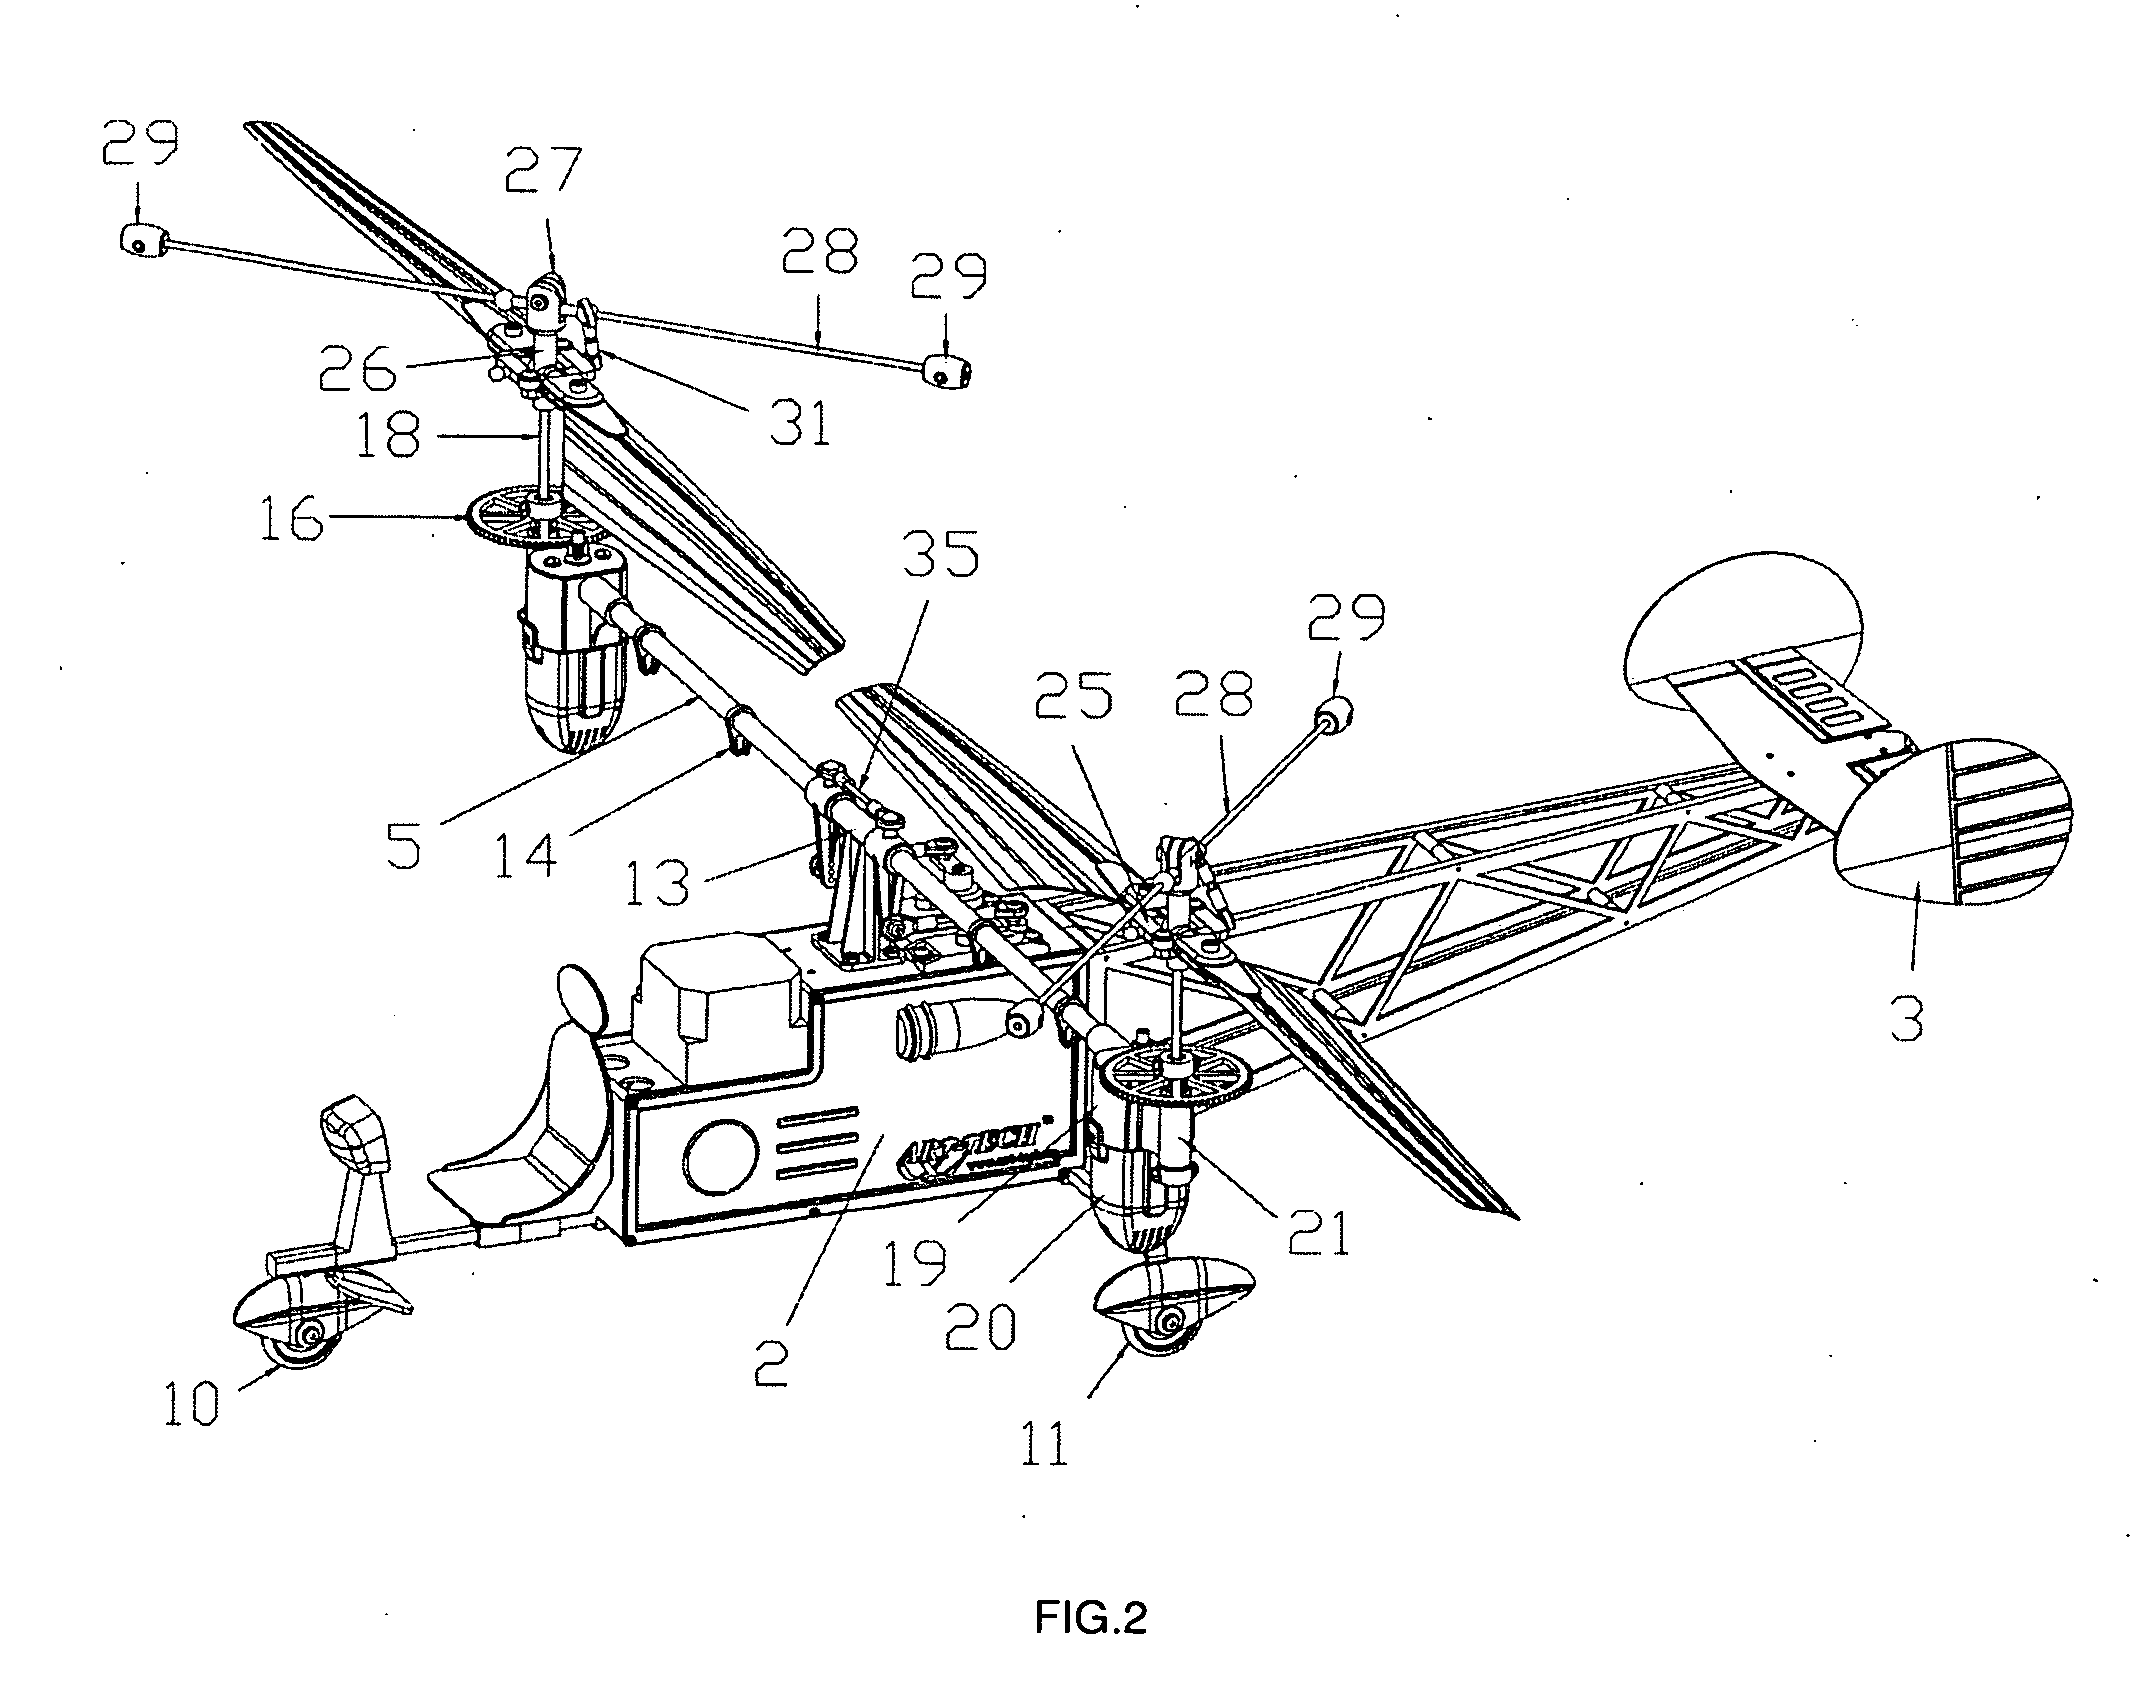 Four-channel transverse dual rotor helicopter